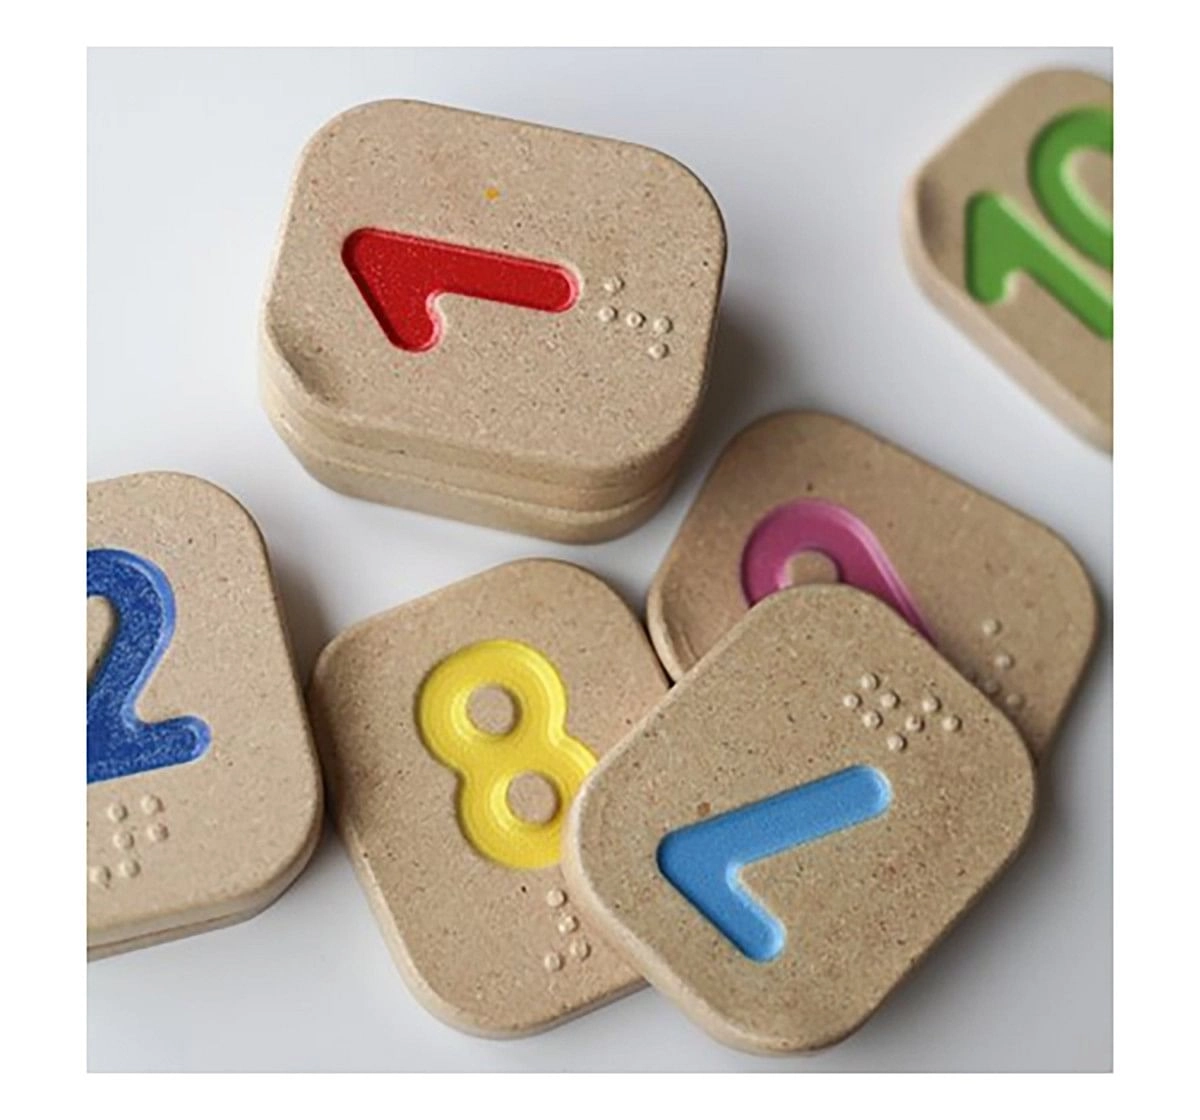 Plan Toys-Braille Numbers 1 - 10  Wooden Toys for Kids age 3Y+ 